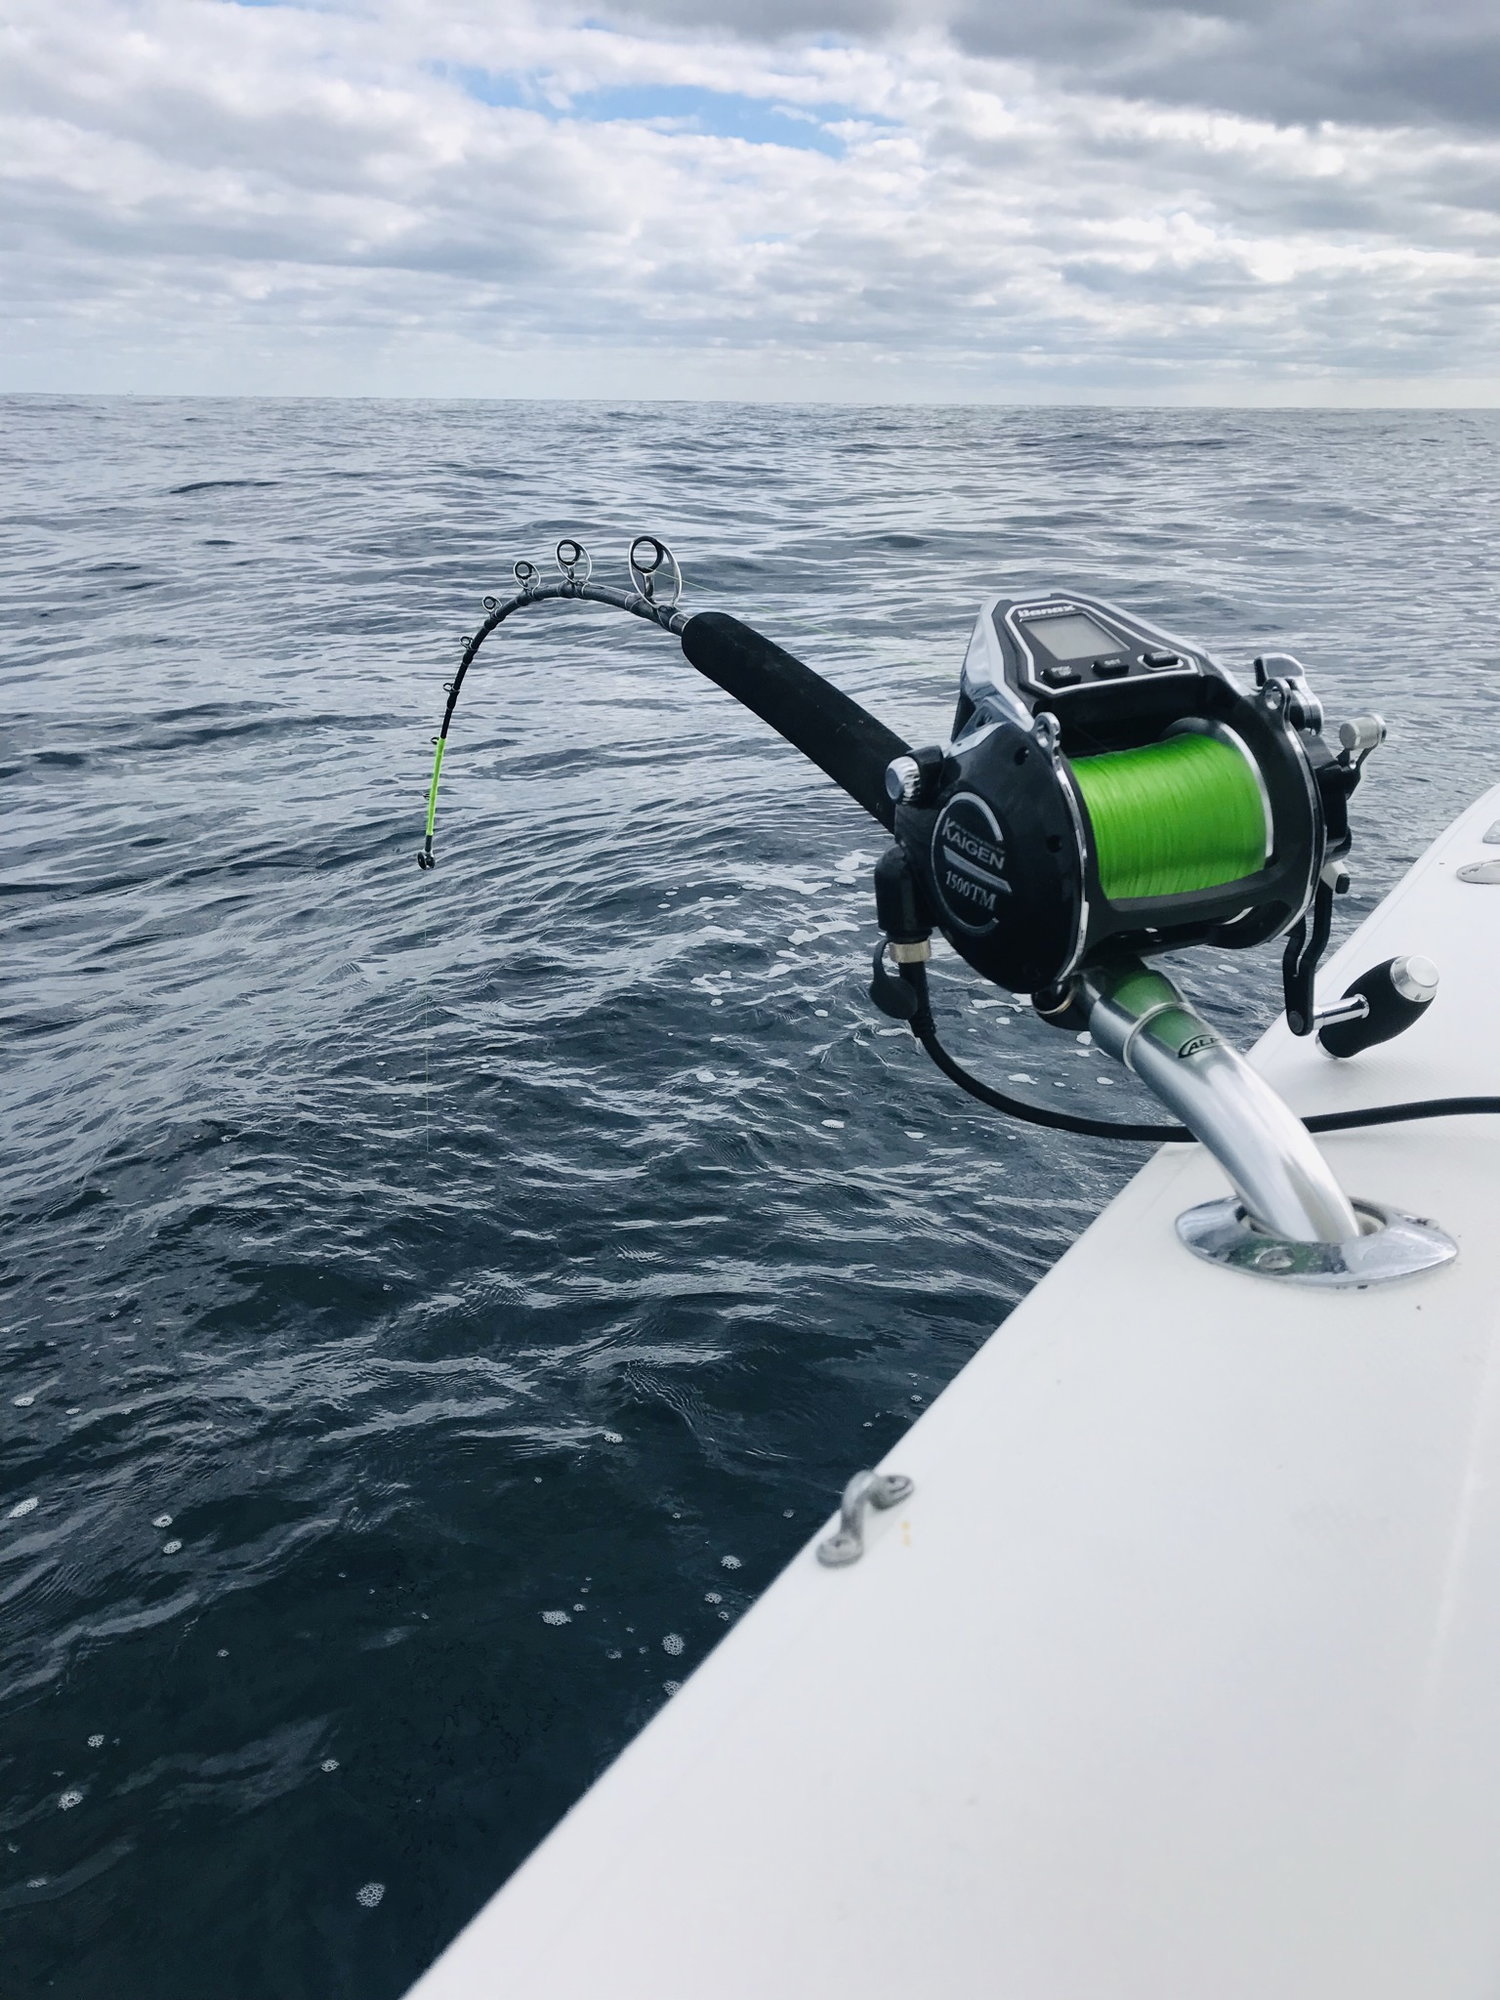 Banax Kaigen 1500TM - strip and check brand new reel - The Hull Truth -  Boating and Fishing Forum